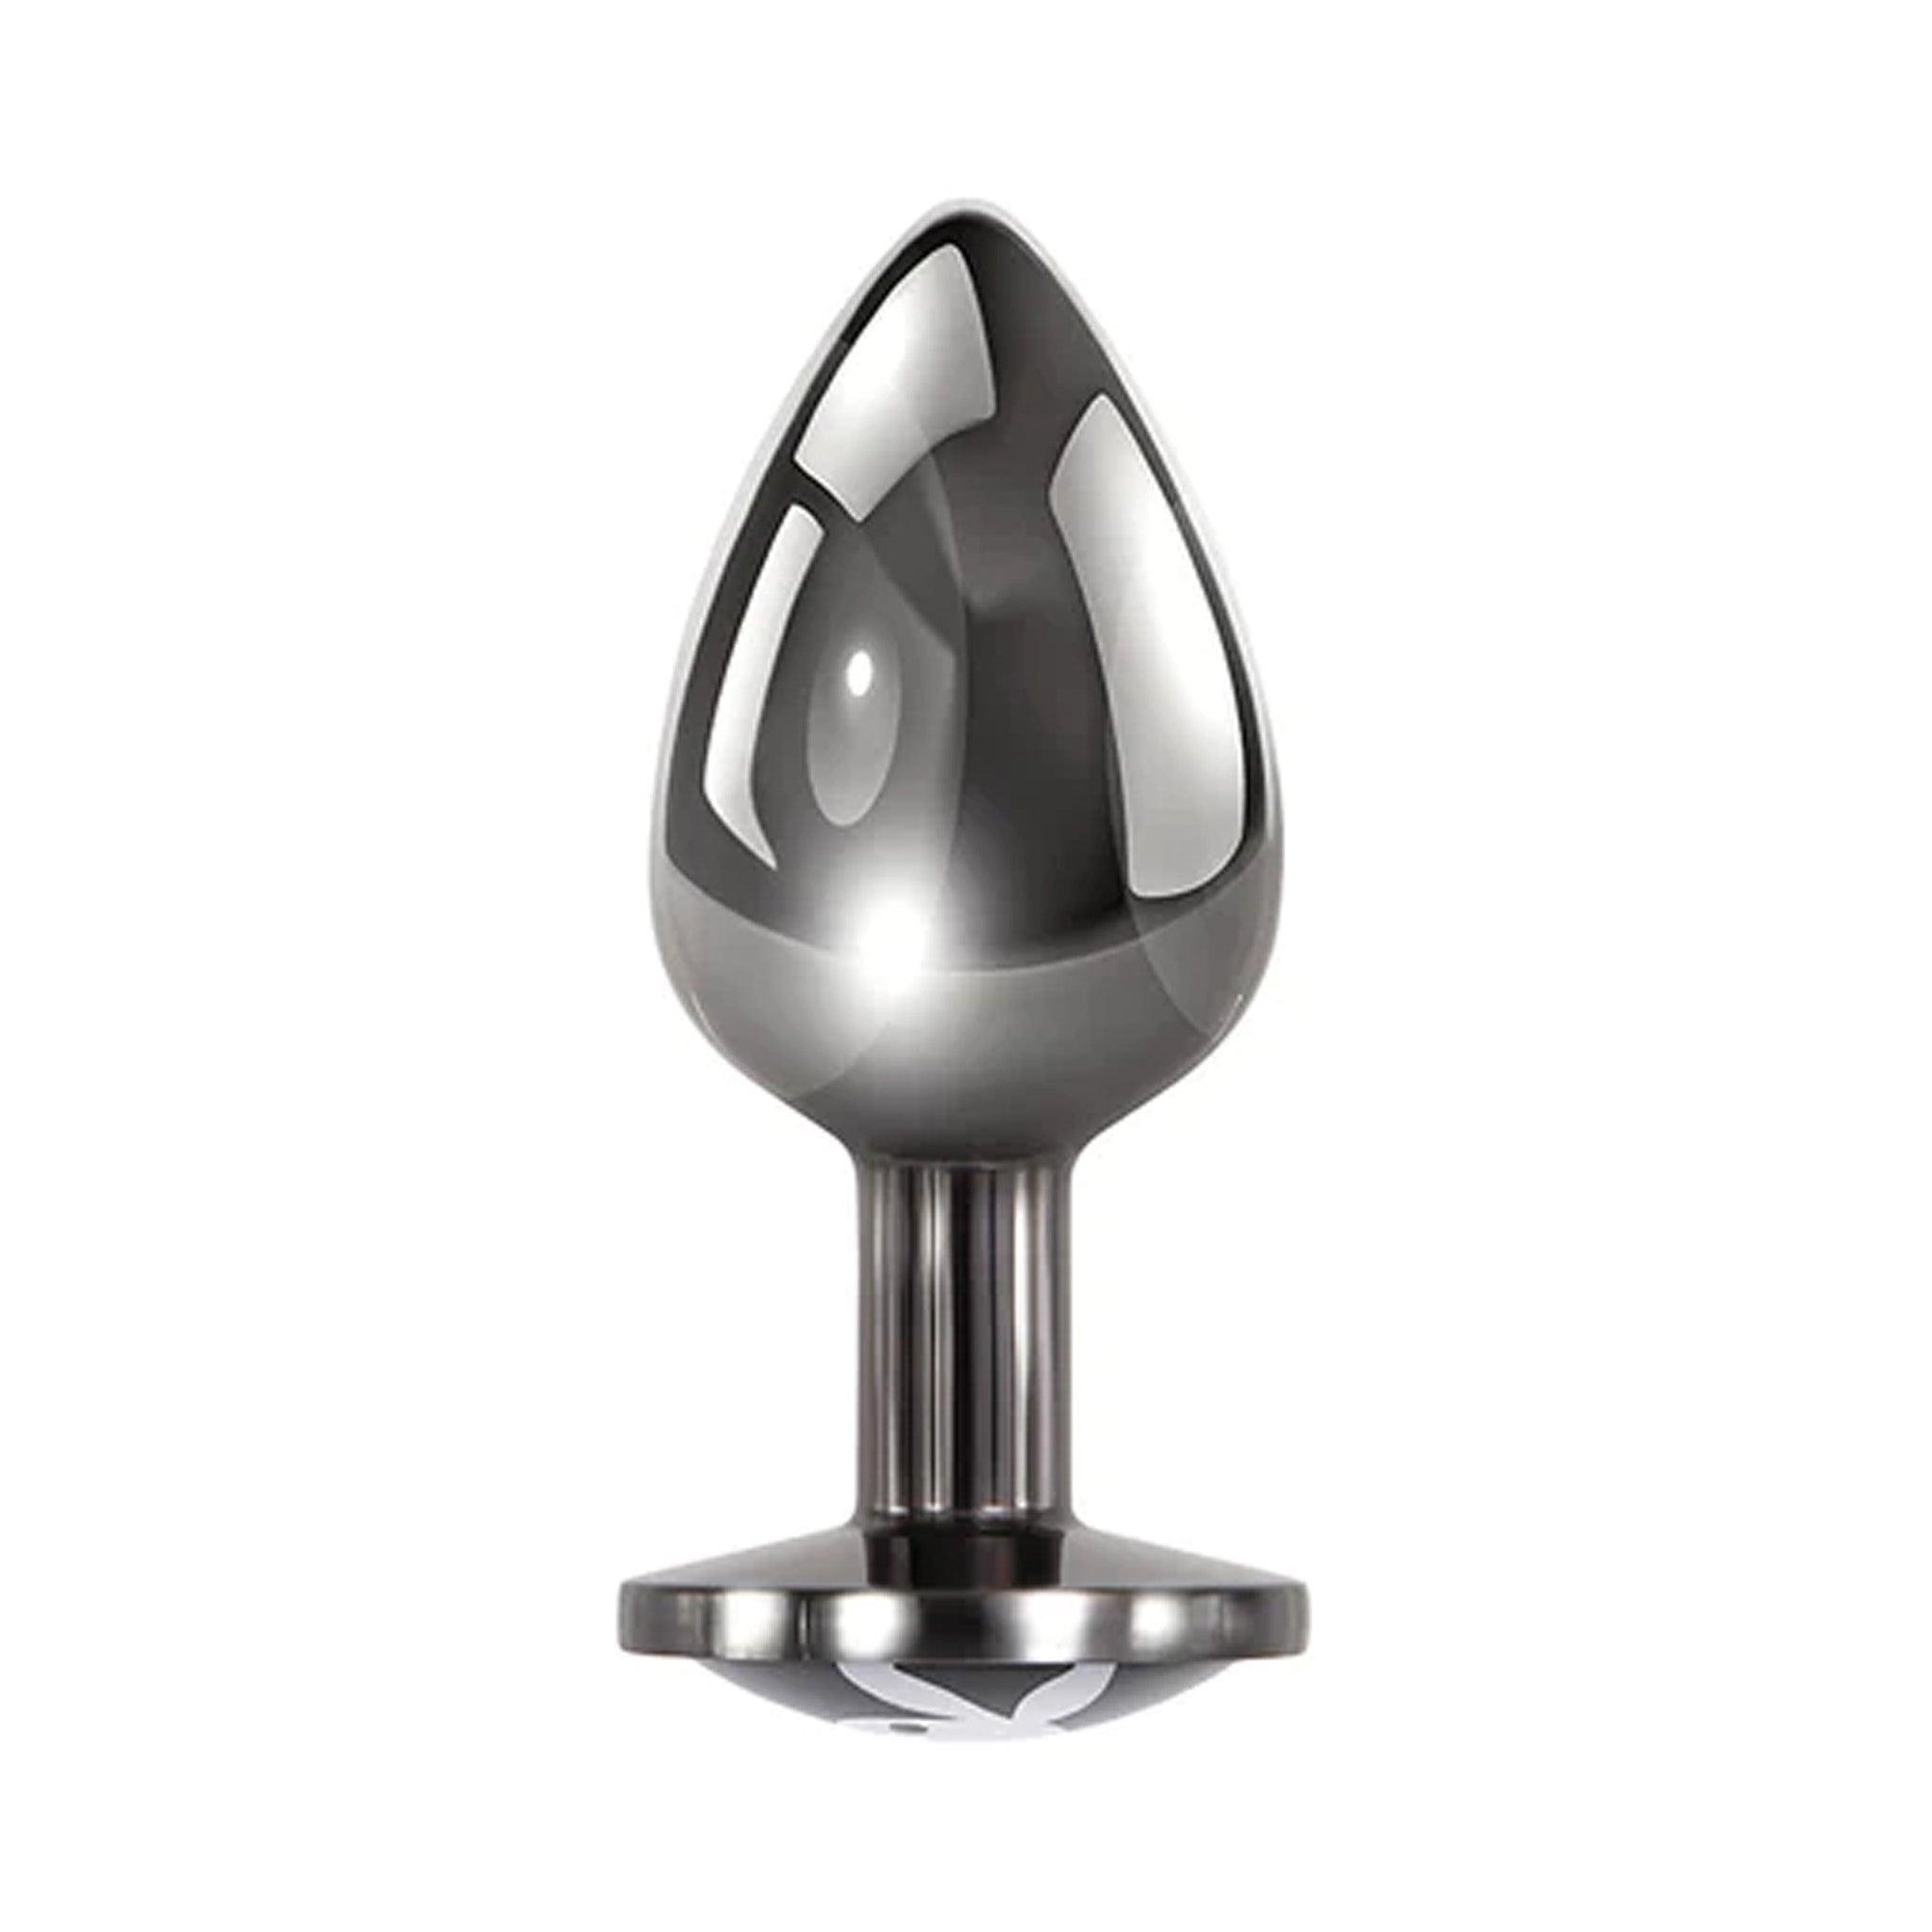 Playboy Tux Metal Anal Plug (2 Sizes Available) - CheapLubes.com